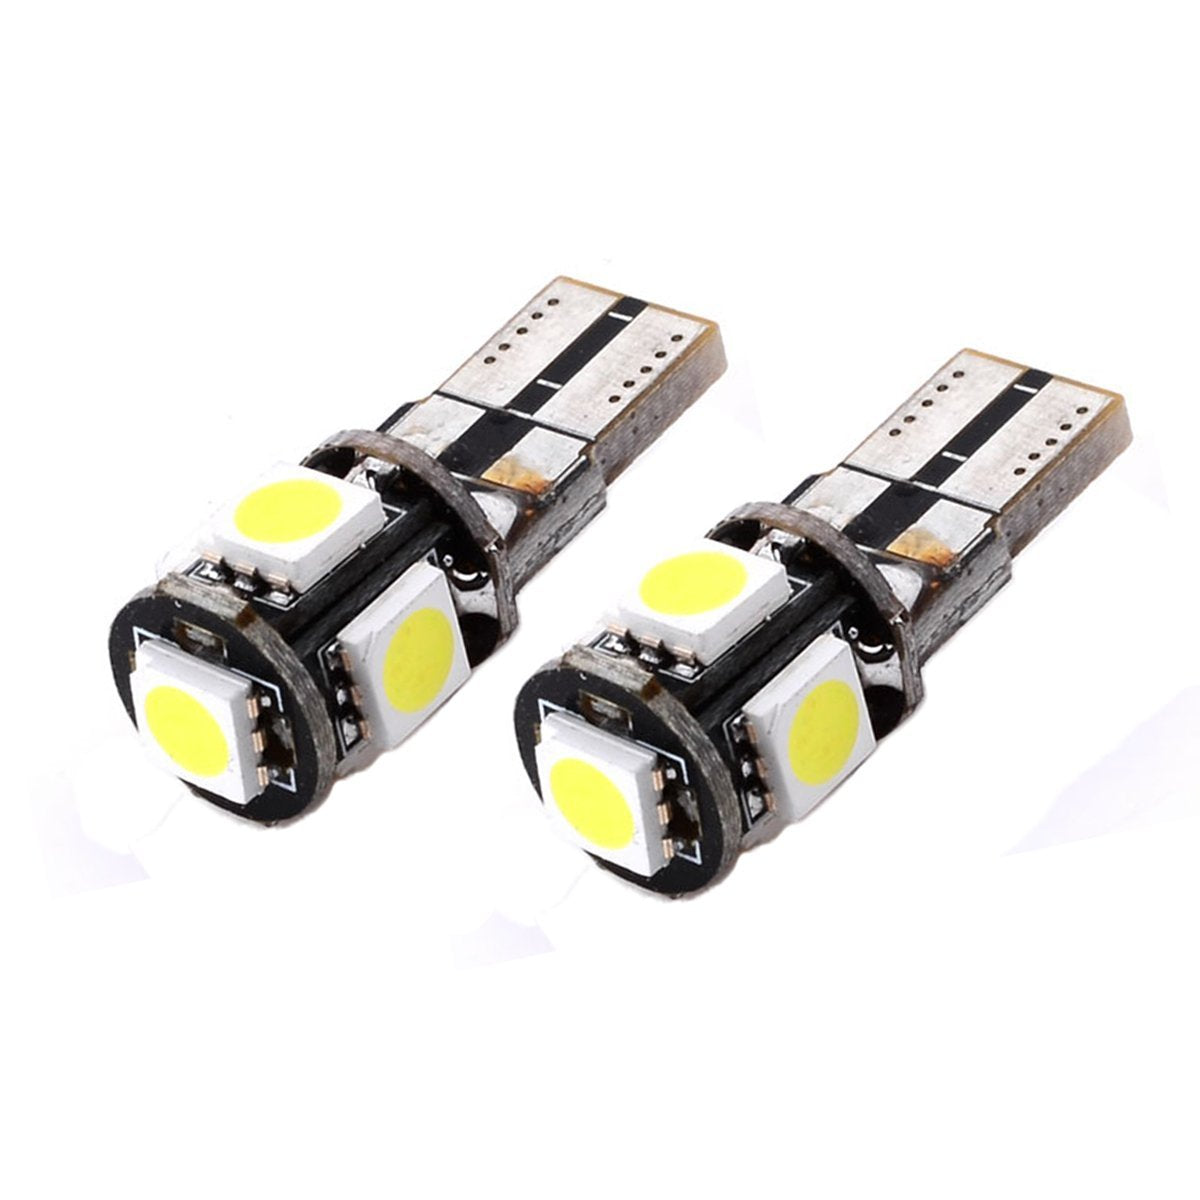 Mercedes Benz Osram Chips T10 W5W 2825 CanBus No Error LED Bulbs For  Headlight Parking City Light - Unique Style Racing